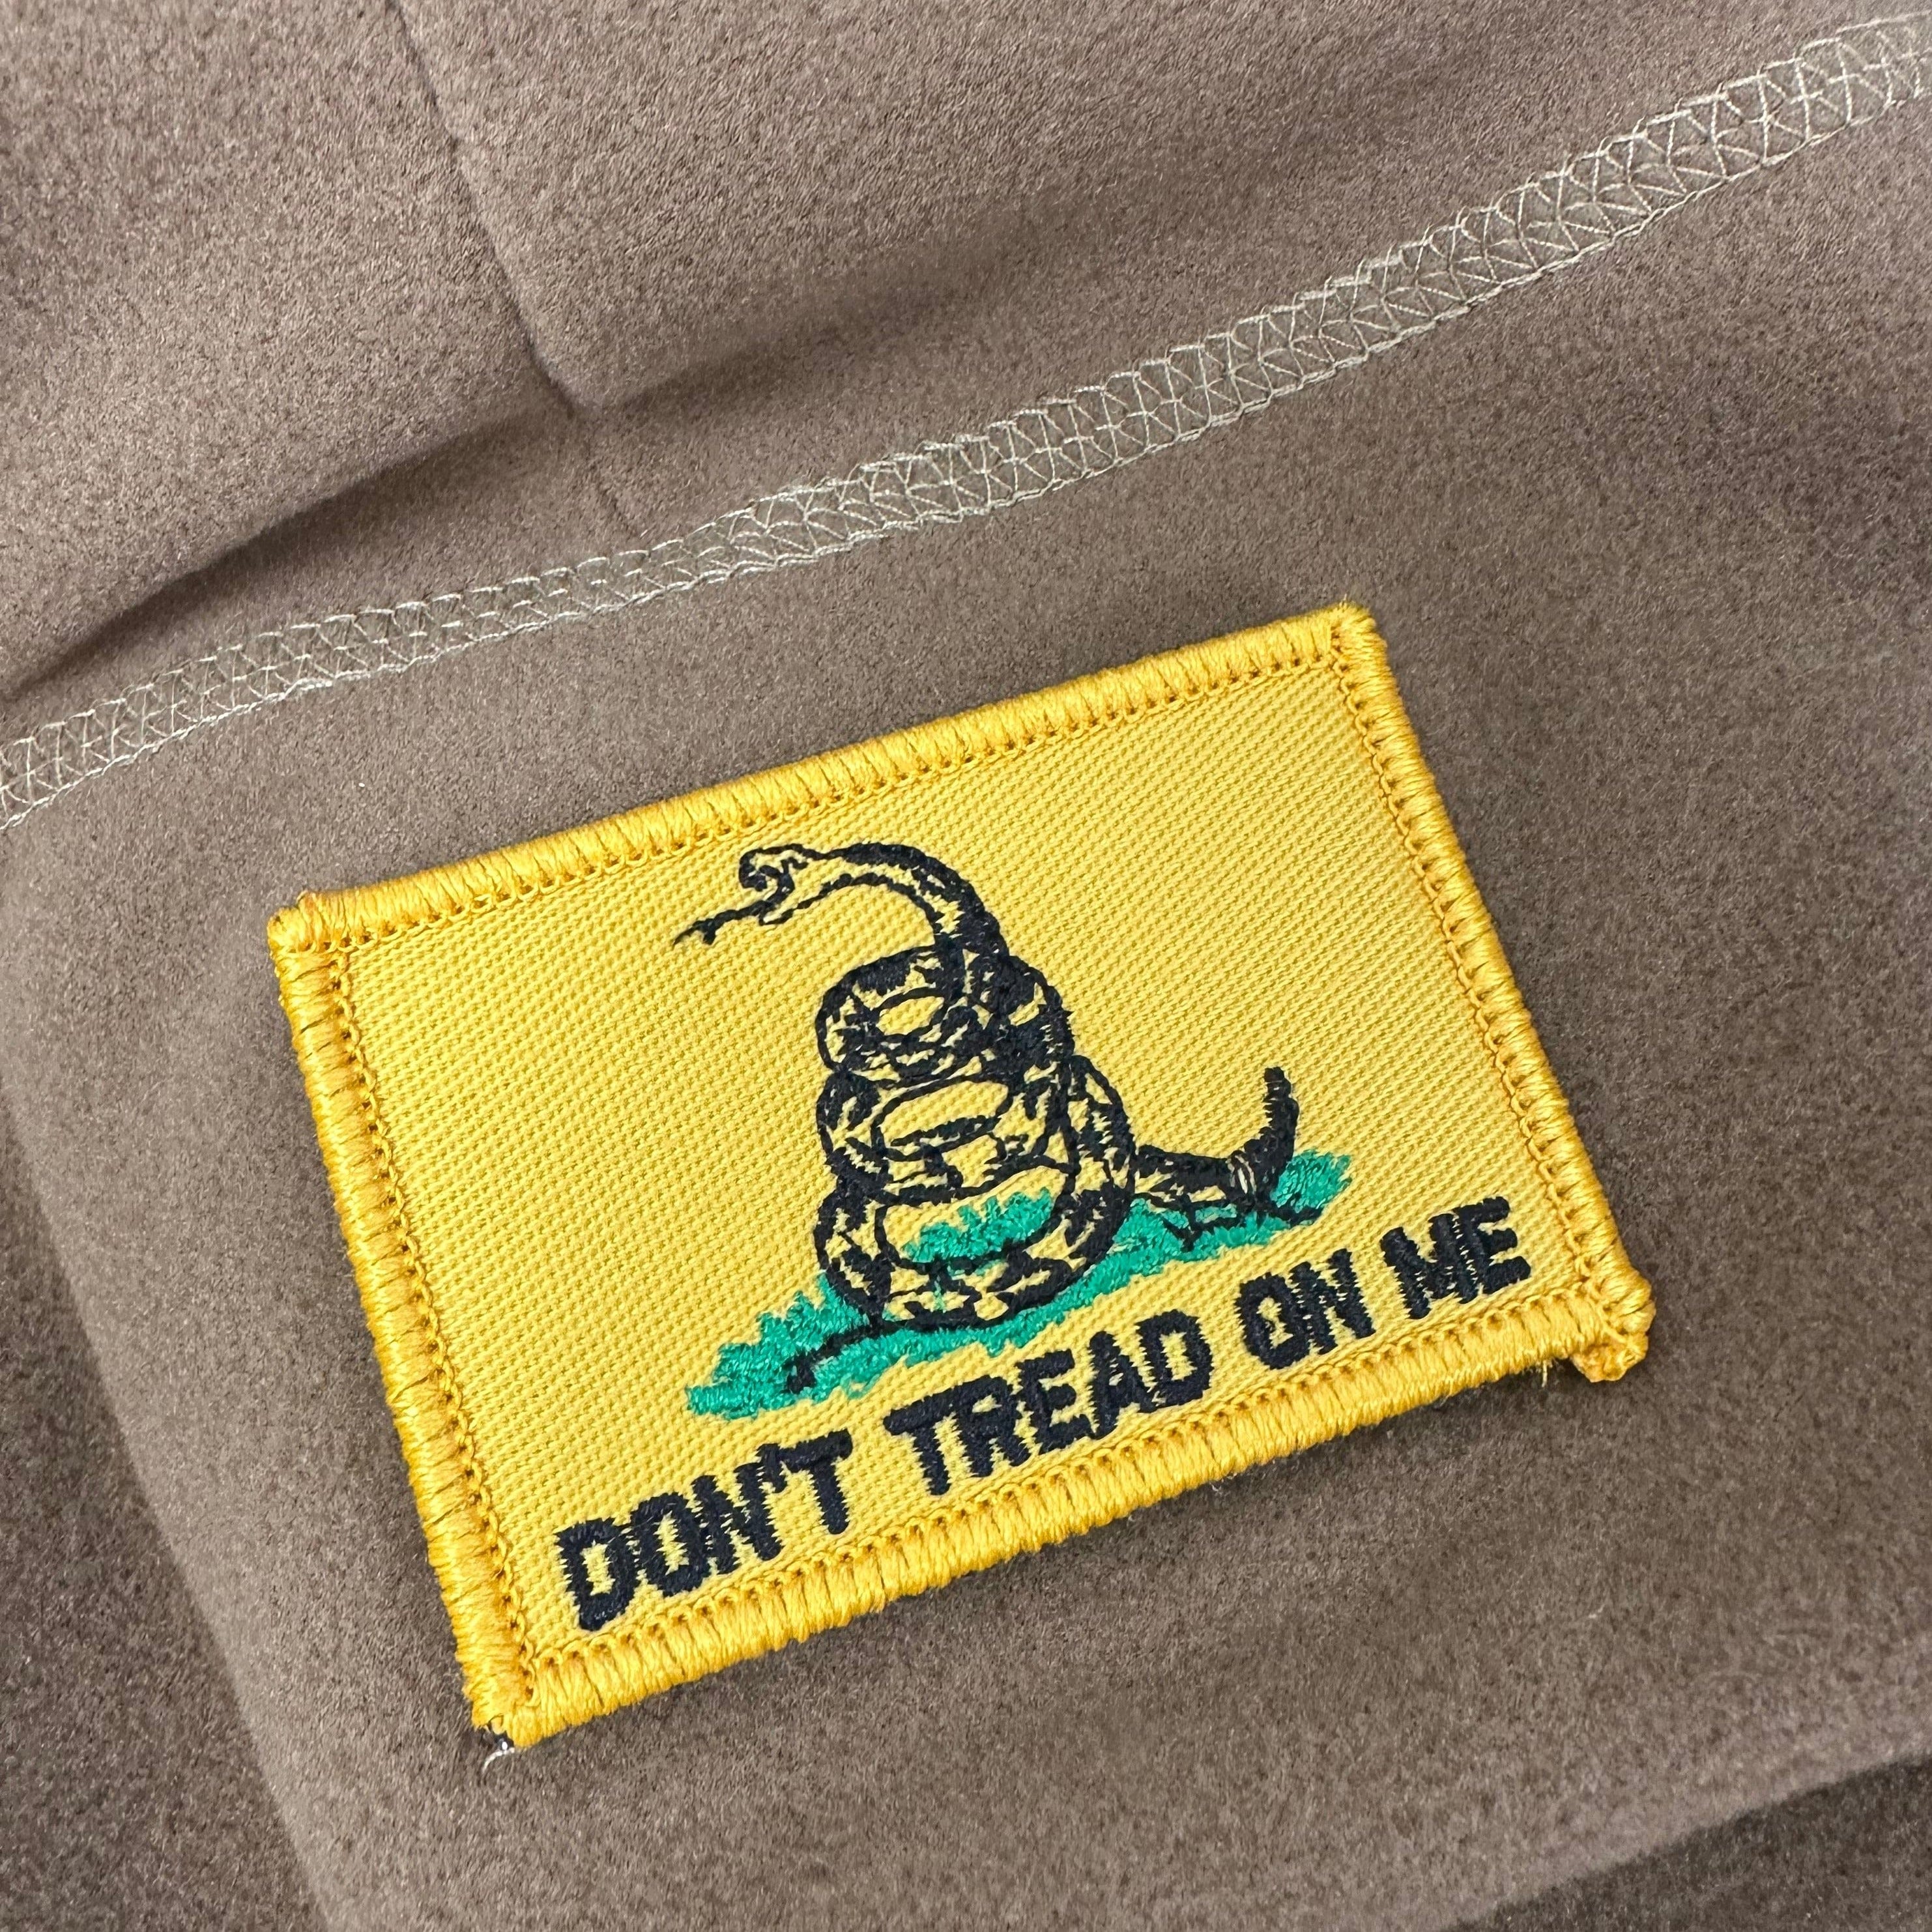 Don't Tread on Me Patch – Cigar Dagger